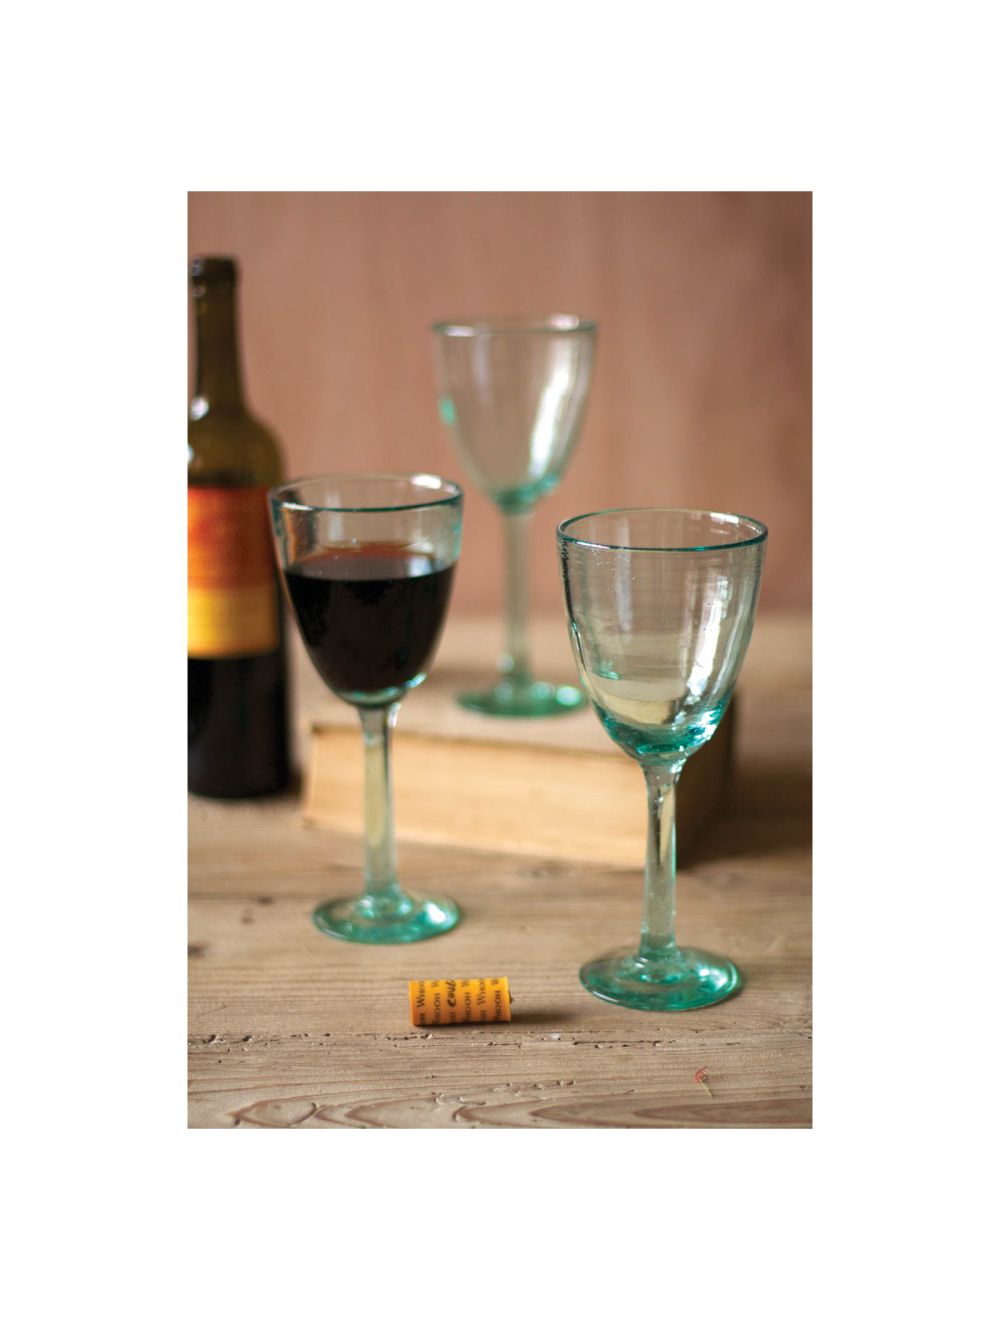 Set of Six Recycled Glass Wine Glasses